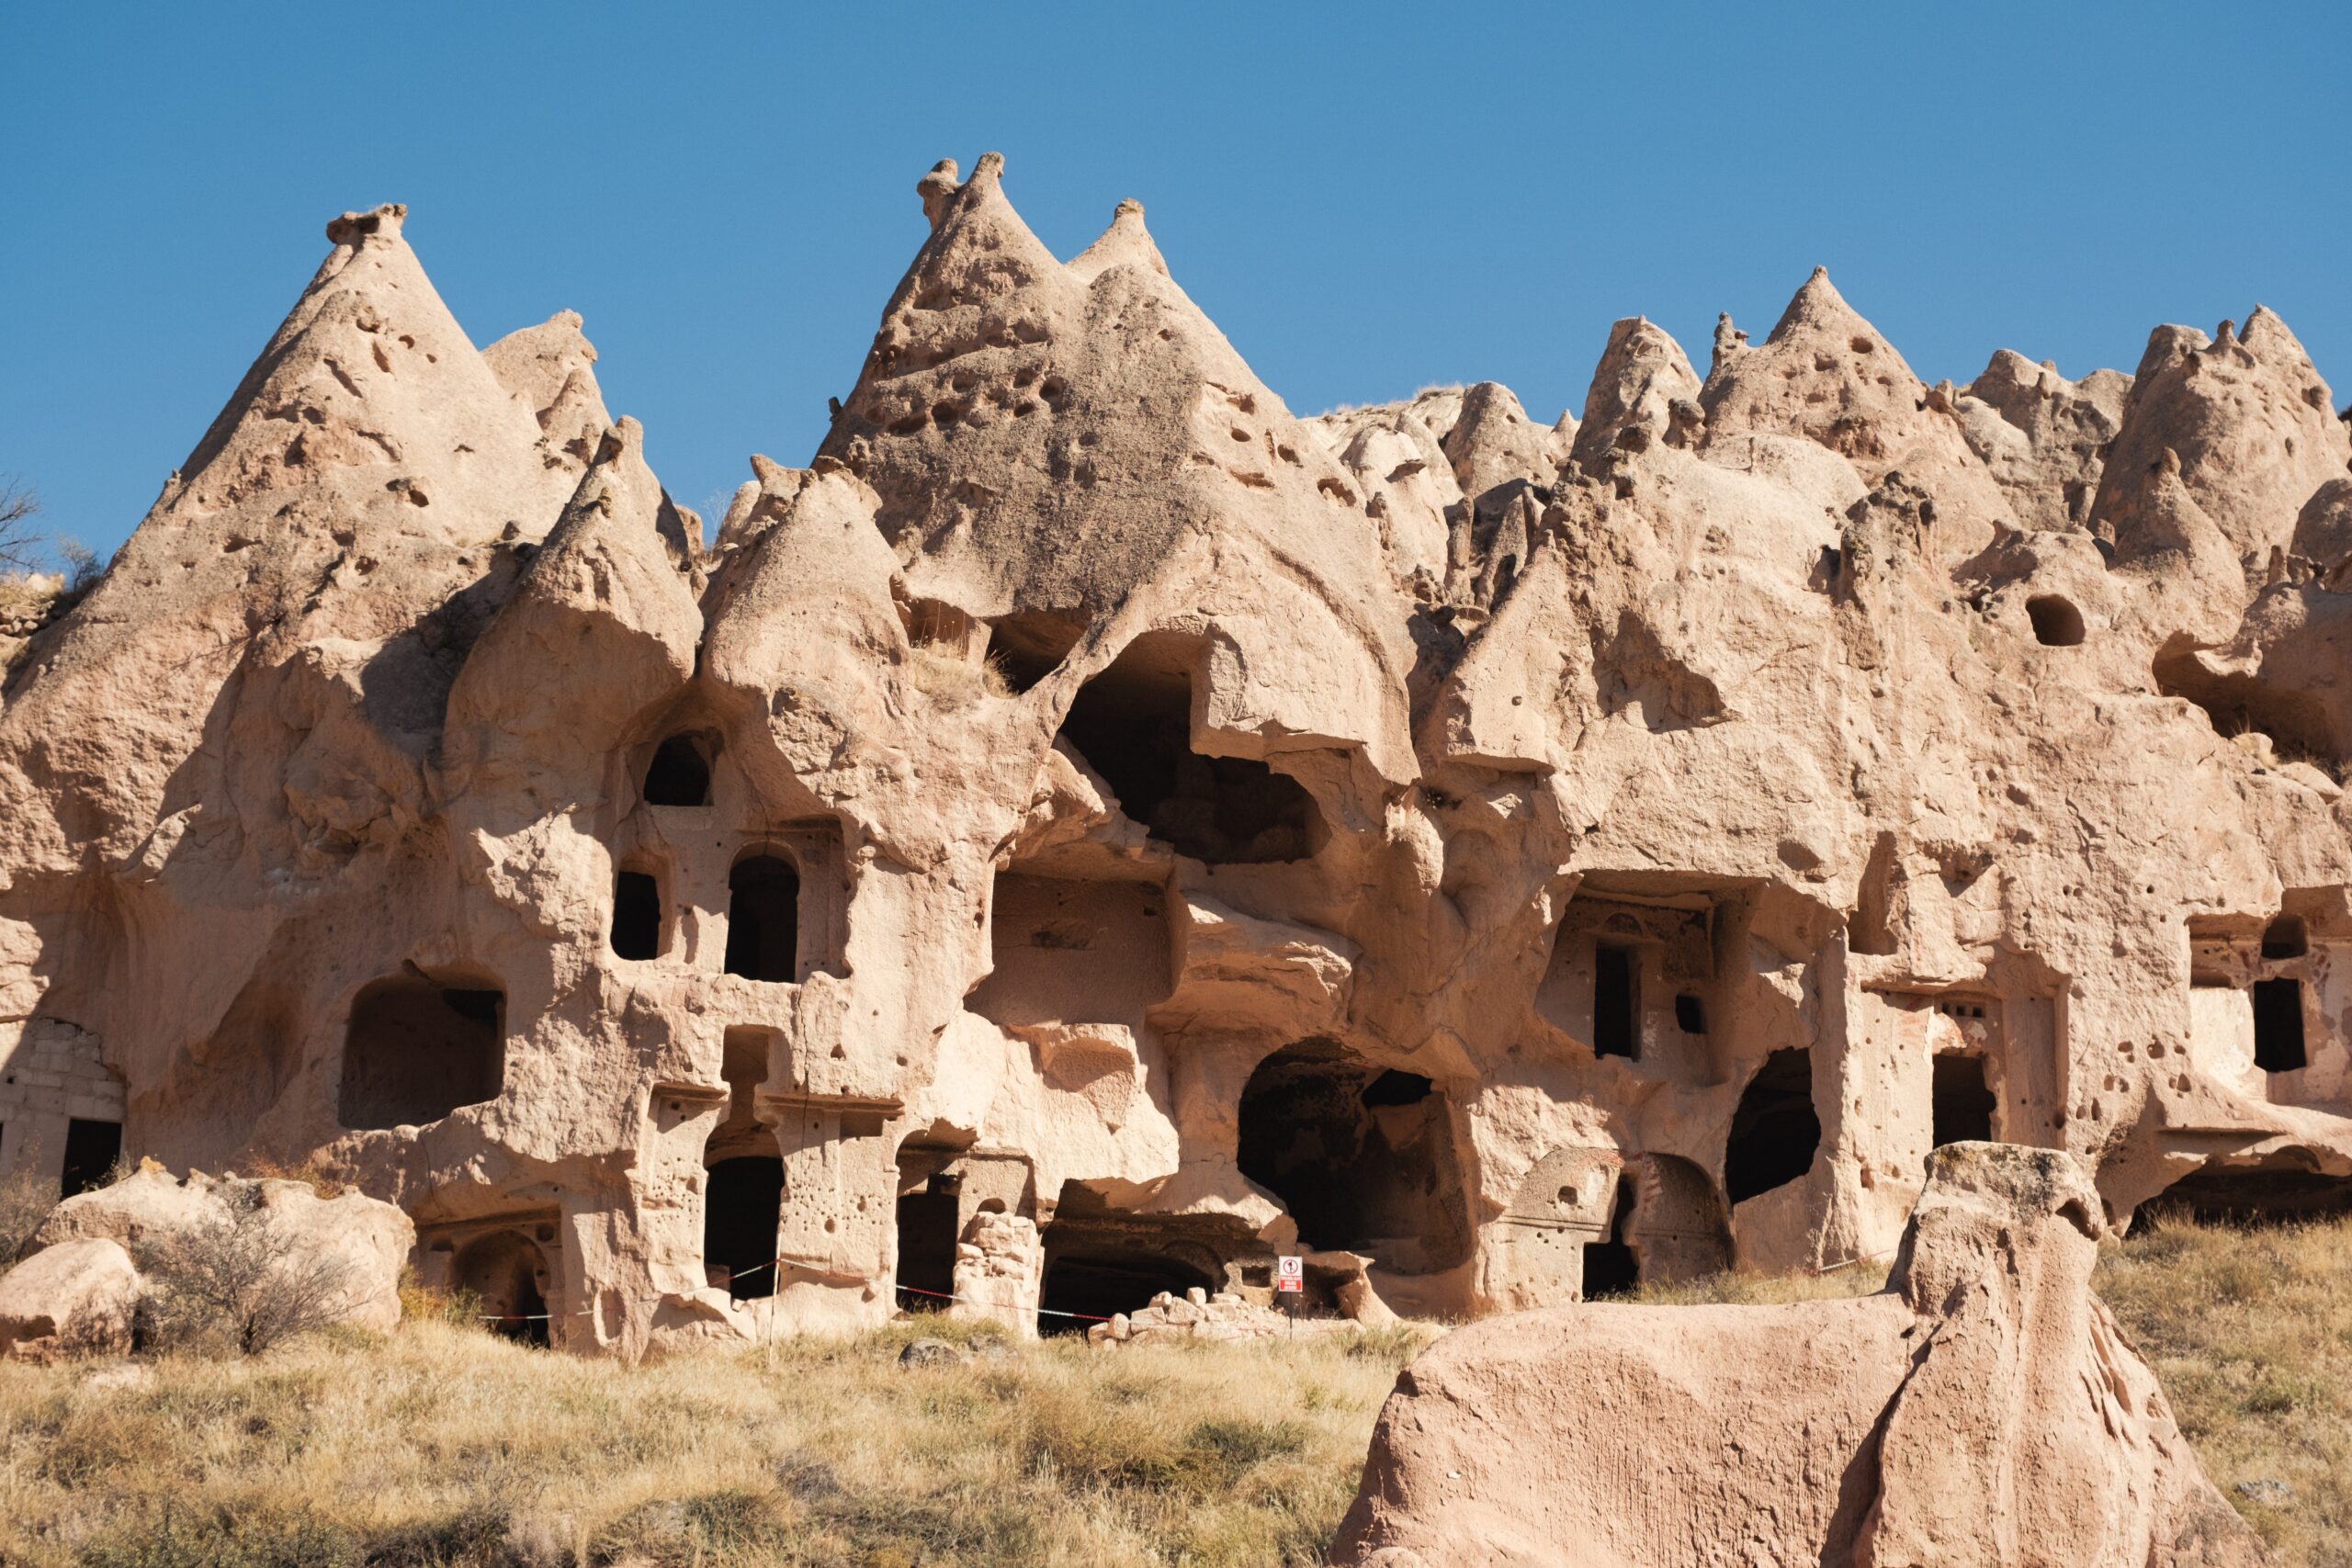 Welcome to the fairytale world of Turkey’s Cappadocia